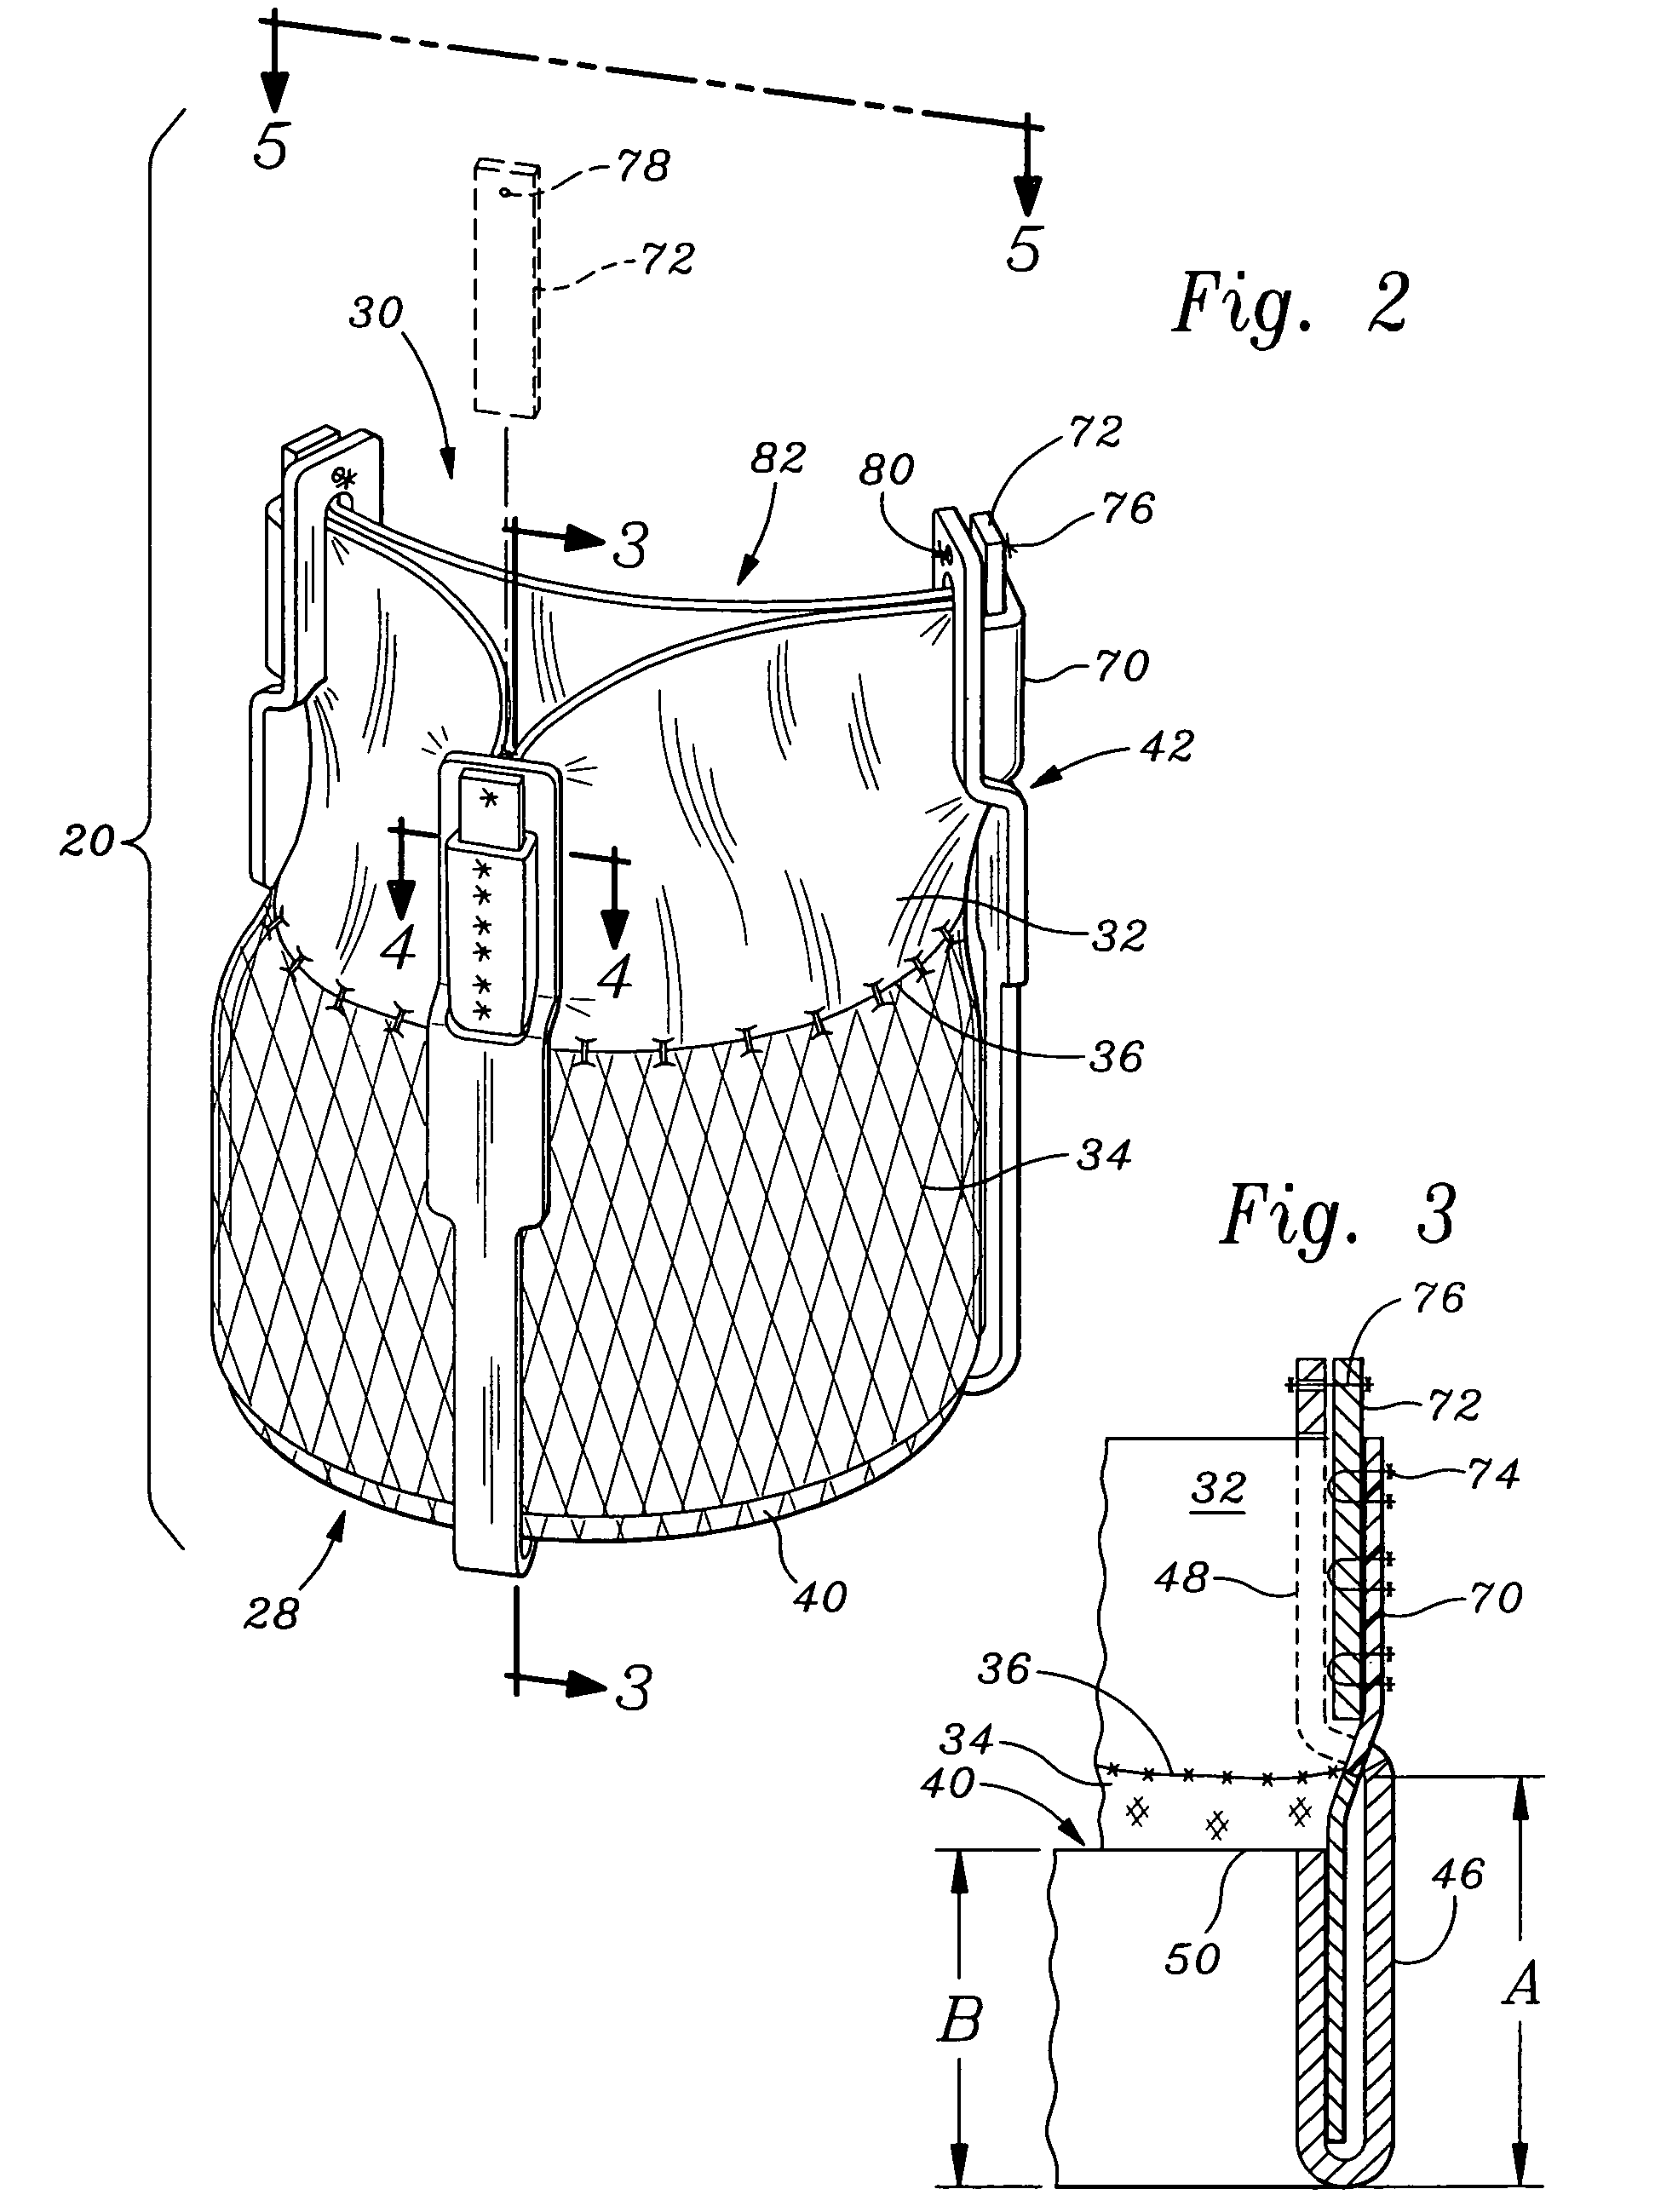 System and method for implanting a two-part prosthetic heart valve